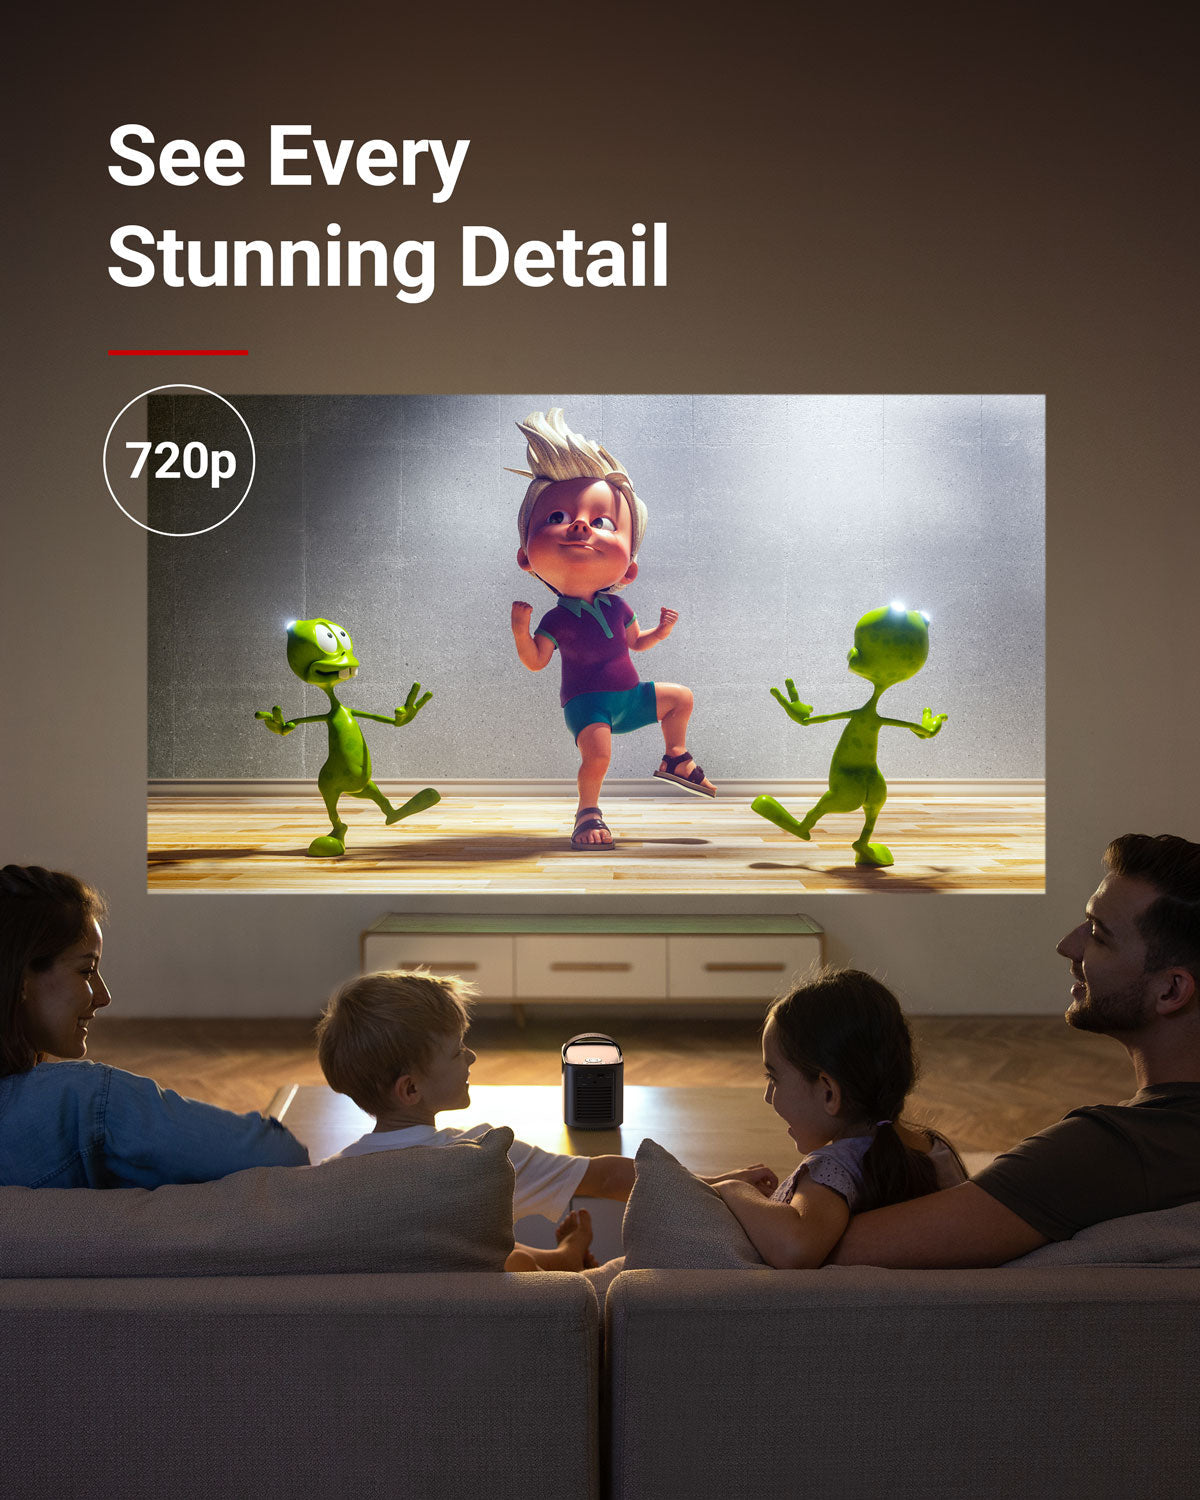 A mom, dad, son, and daughter smile as they use a Mars 2 Pro portable projector to watch a cartoon in their living room.